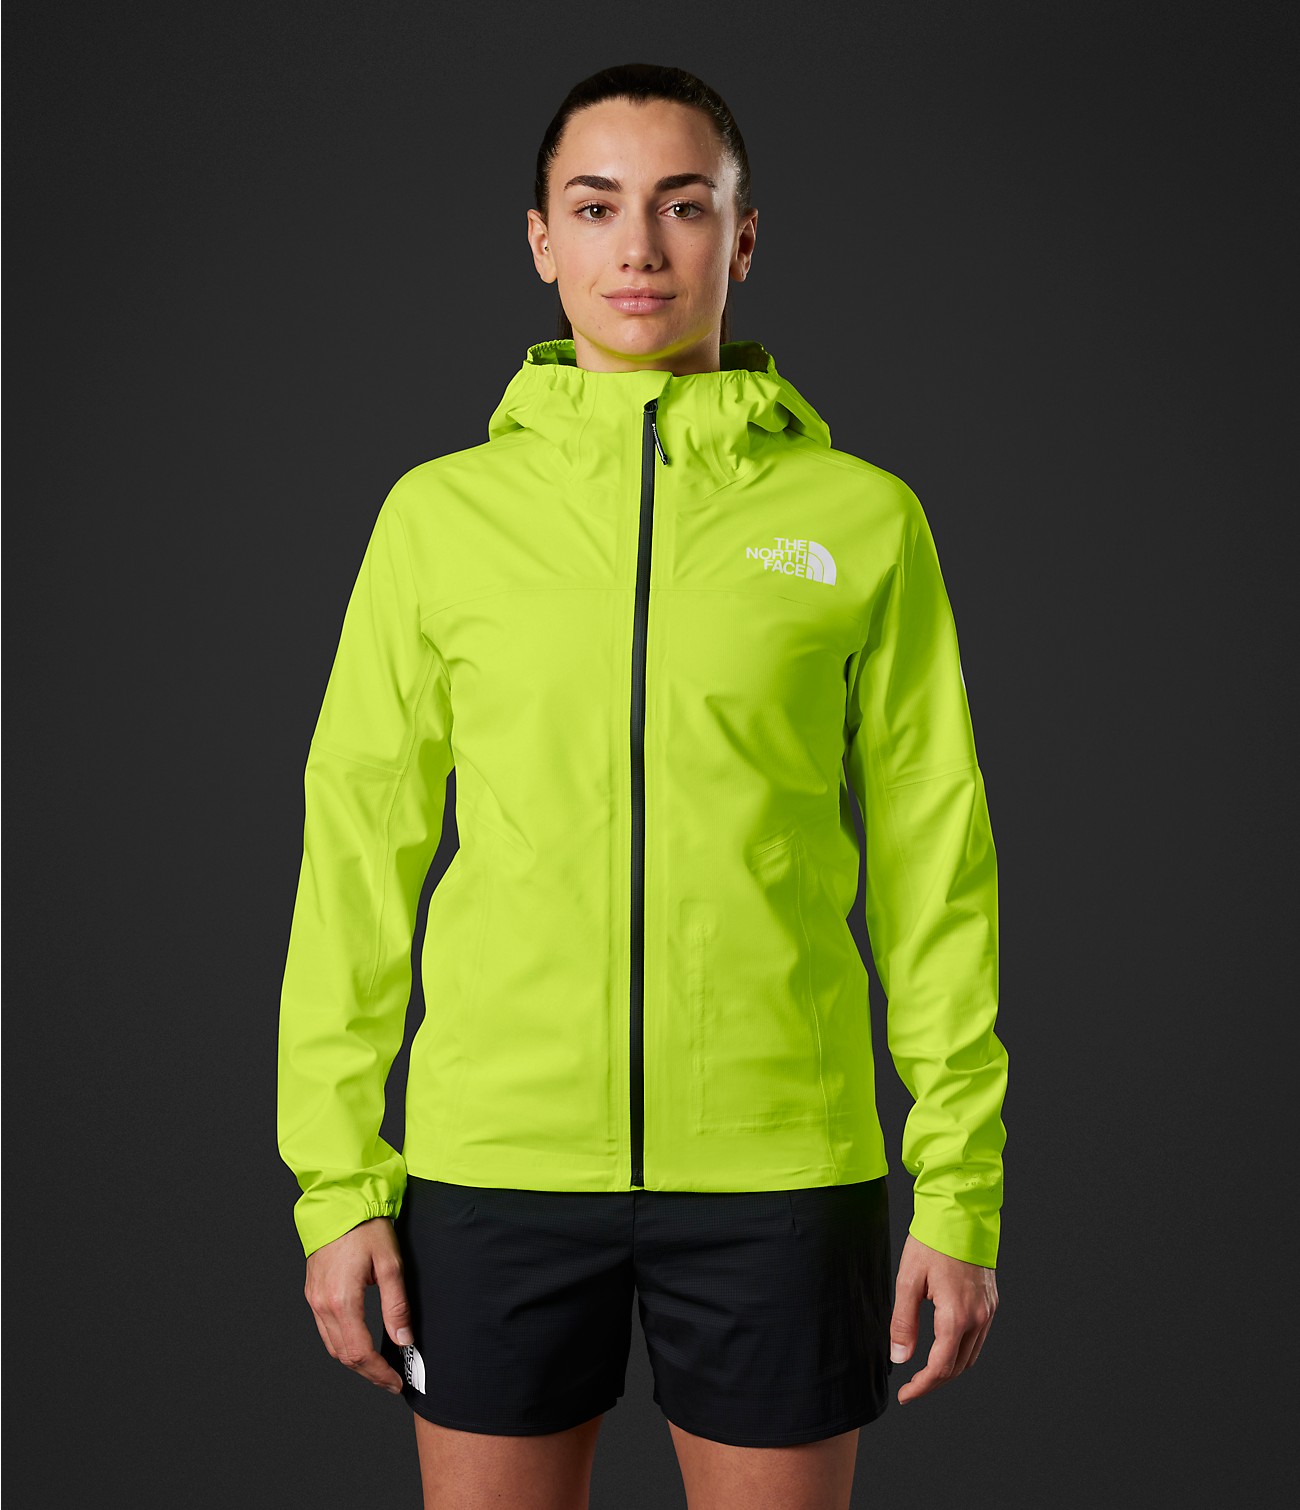 Unlock Wilderness' choice in the Outdoor Research Vs North Face comparison, the Summit Series Superior FUTURELIGHT™ Jacket by The North Face